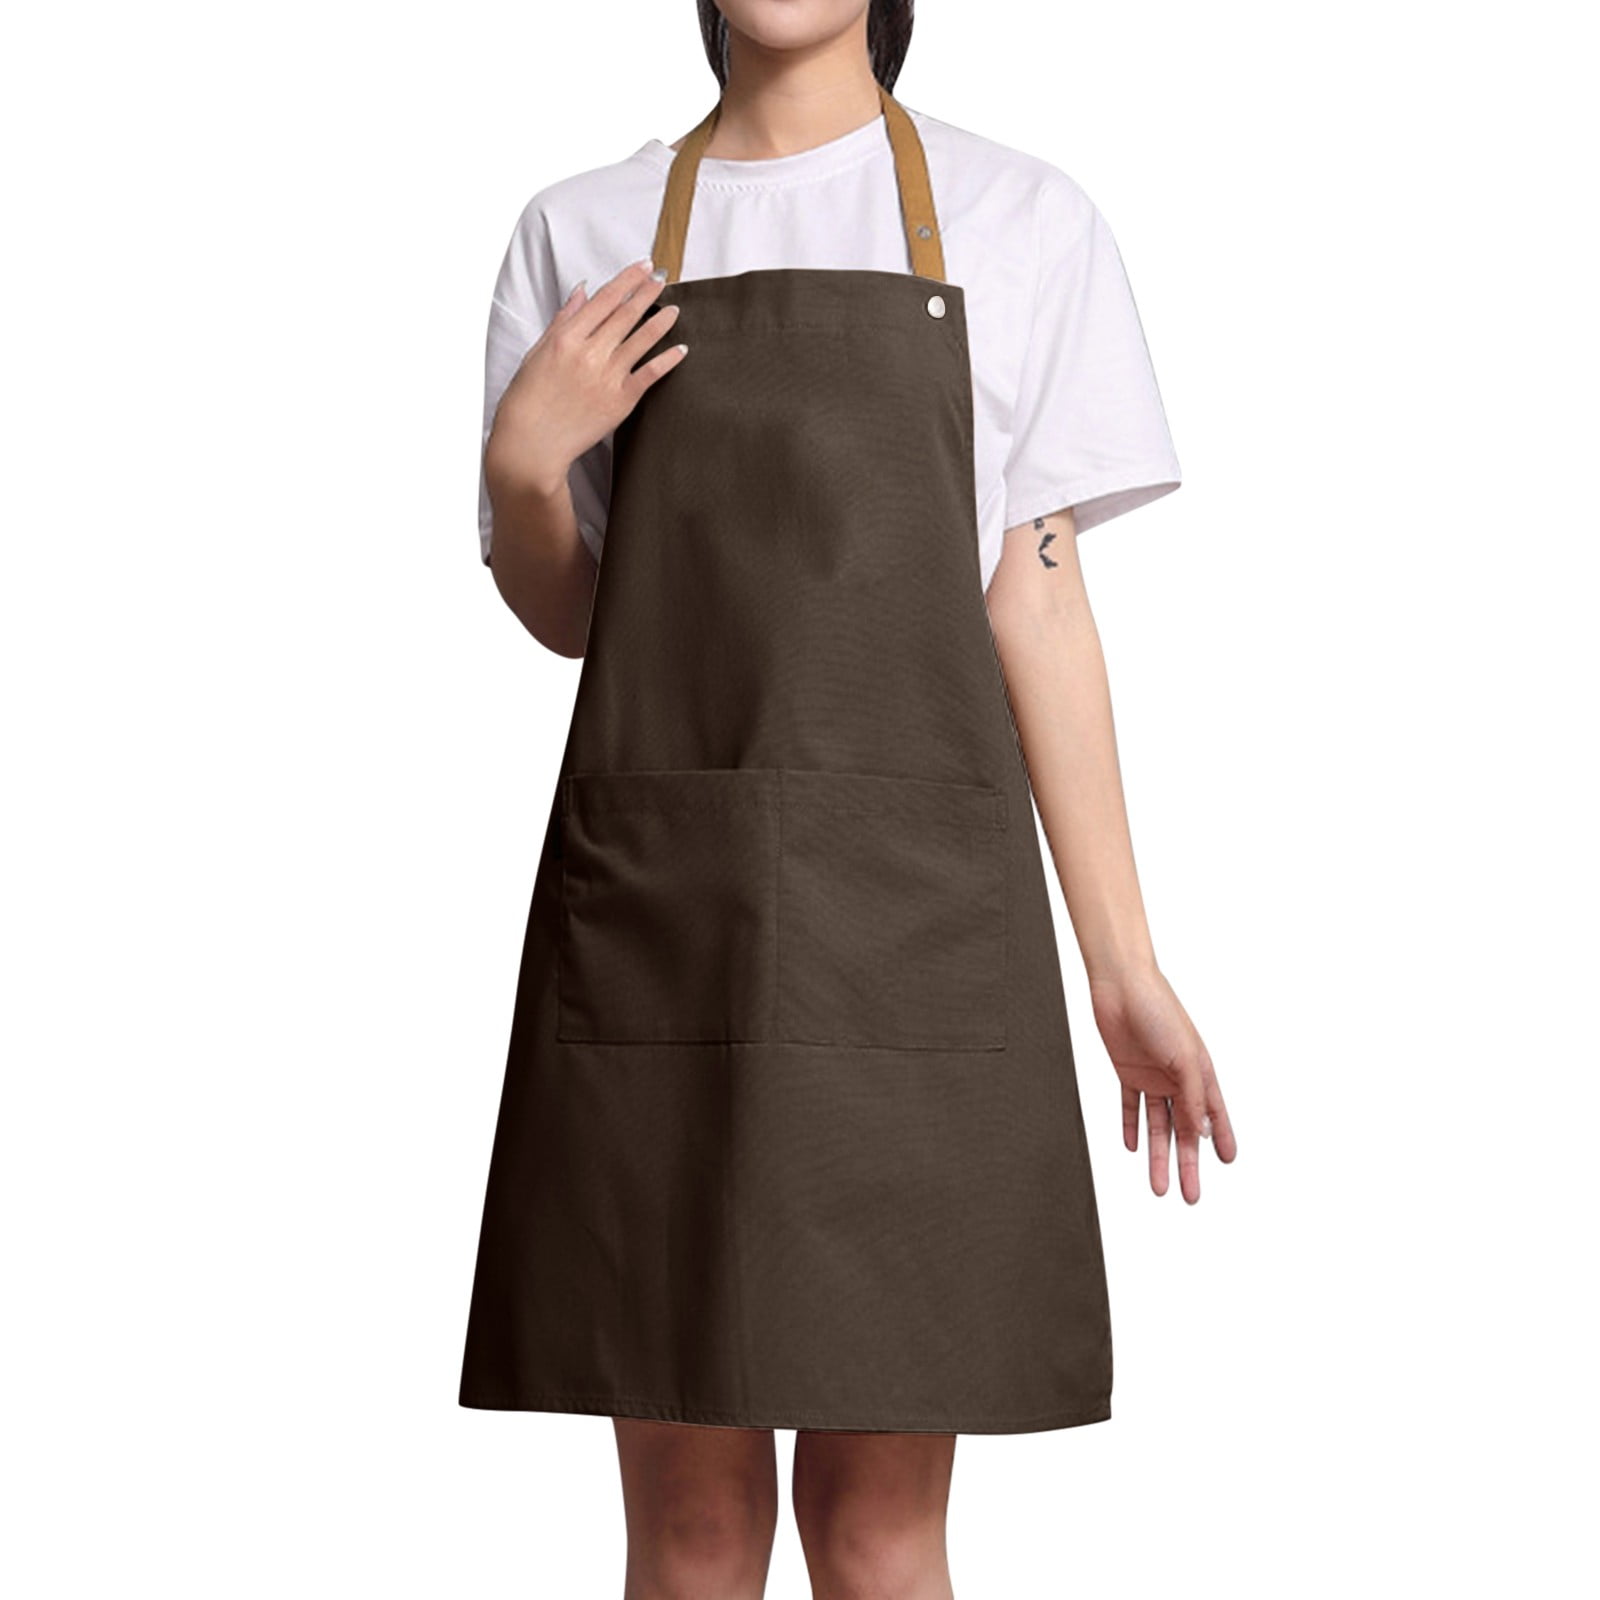 Kitchen Apron Guide : Kitchen tips and very helpful conversions.